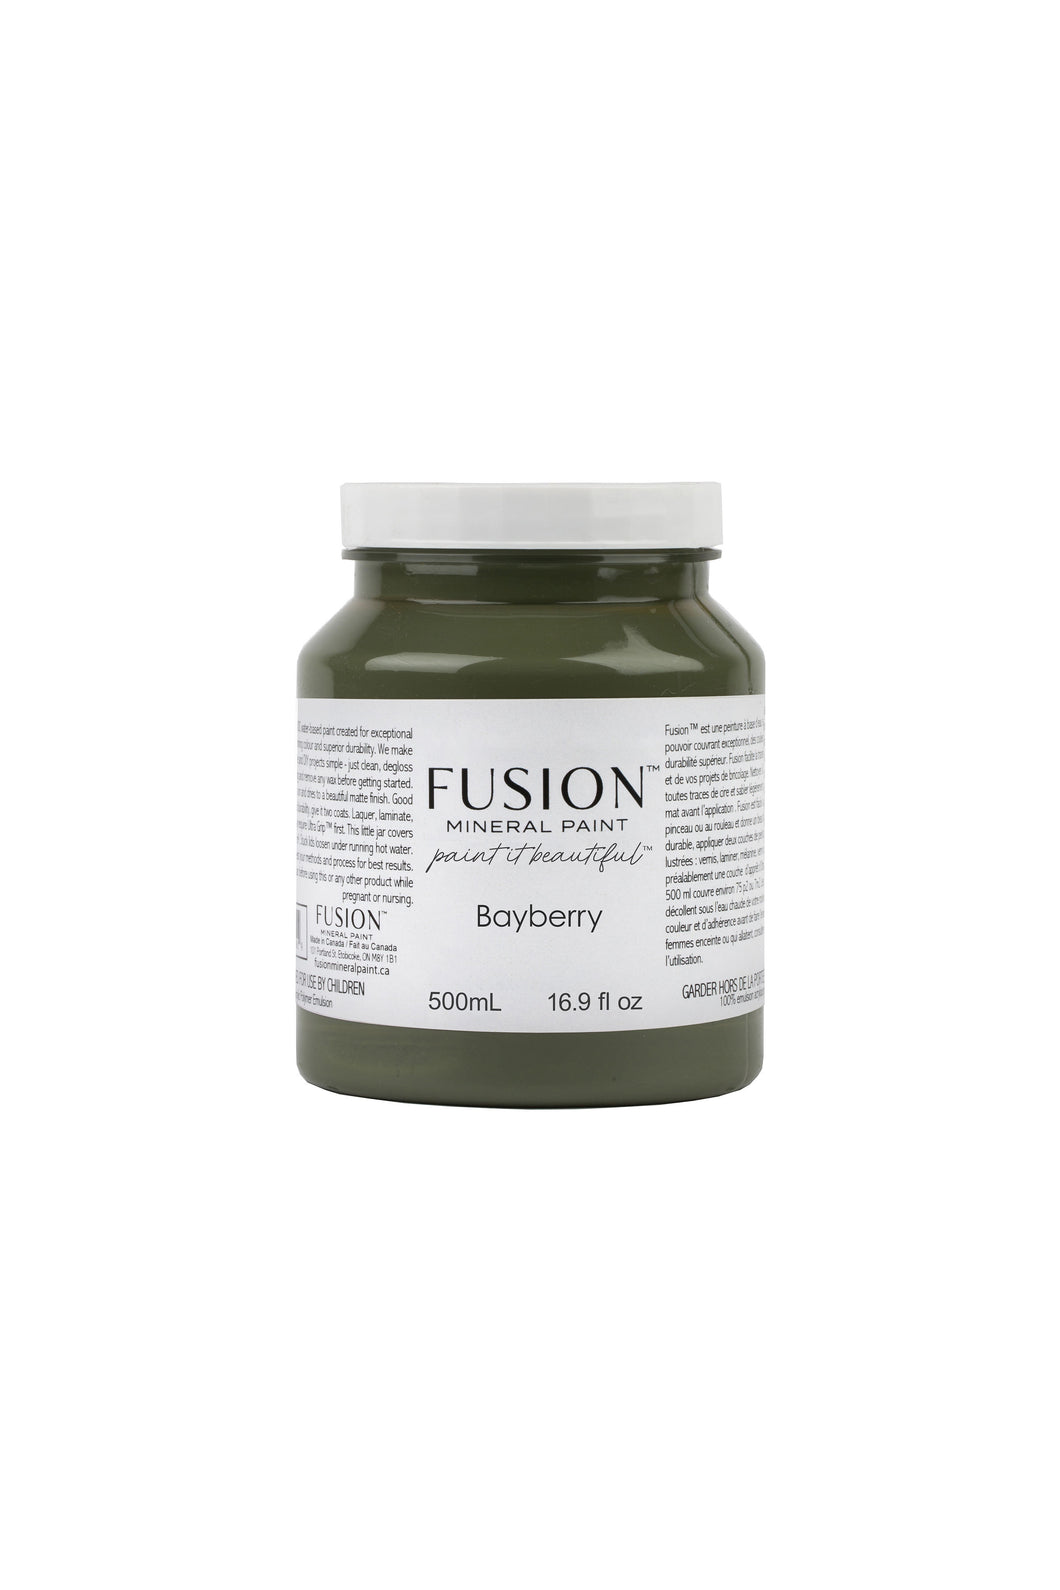 Fusion Mineral Paint - Bayberry 500 ml Jar